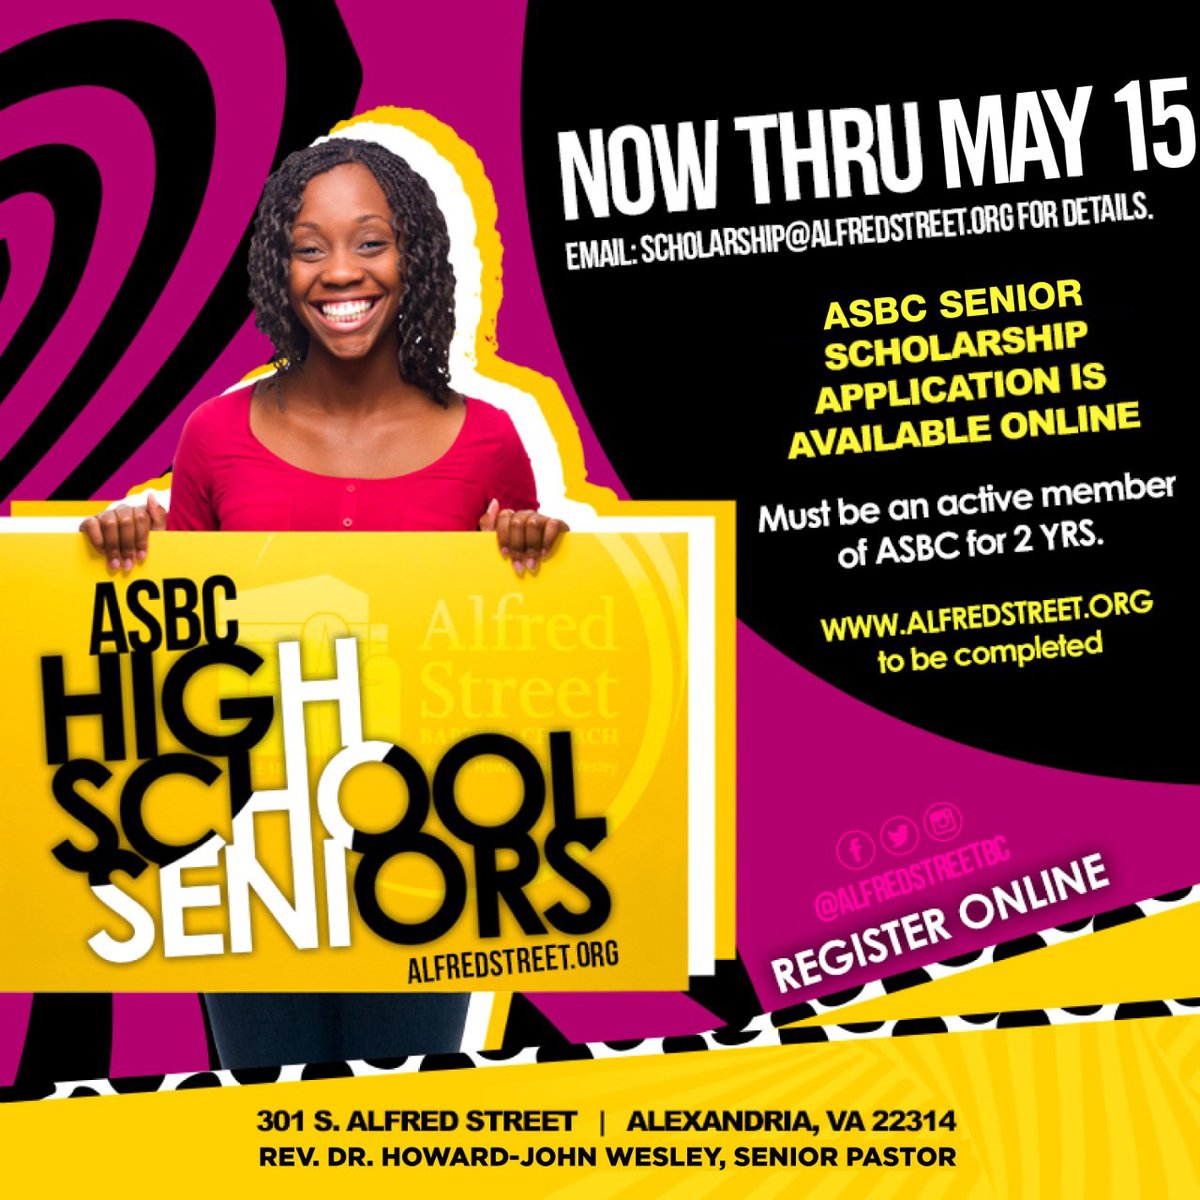 🚨 Attention ASBC High School Seniors! 🚨 The deadline to apply for the ASBC Senior Scholarship is approaching fast! Don't miss this opportunity! Apply by May 15th at alfredstreet.org. #alfredstreet #scholarship